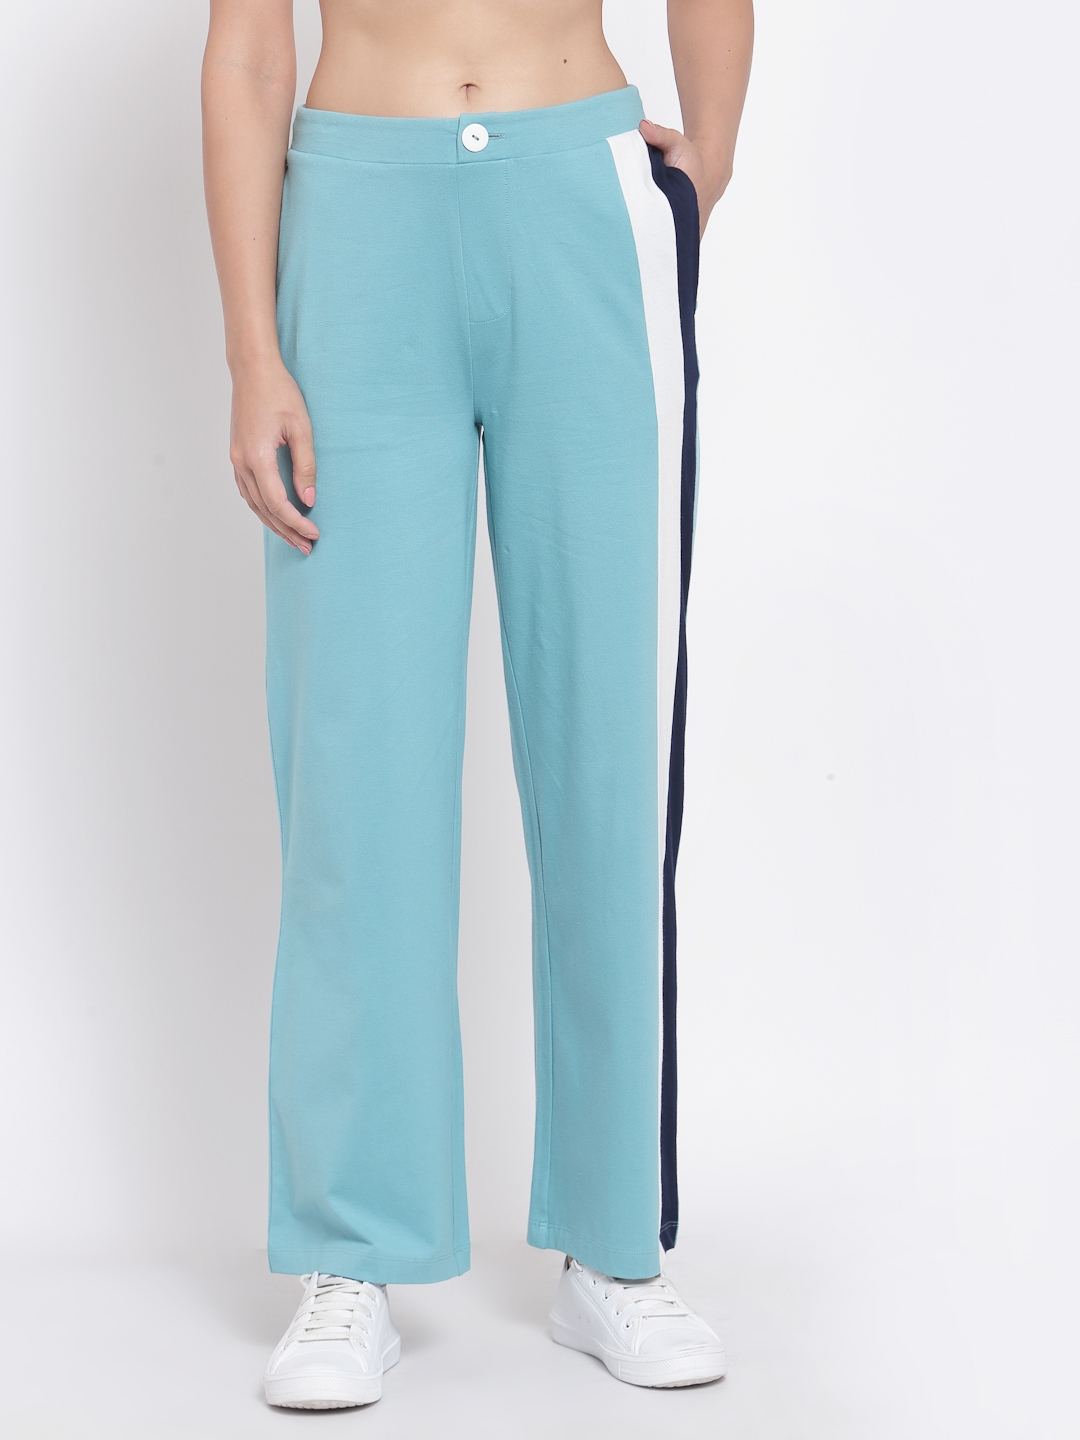 YOONOY | Yoonoy Women Colorblock Straight Pants with Side Pockets